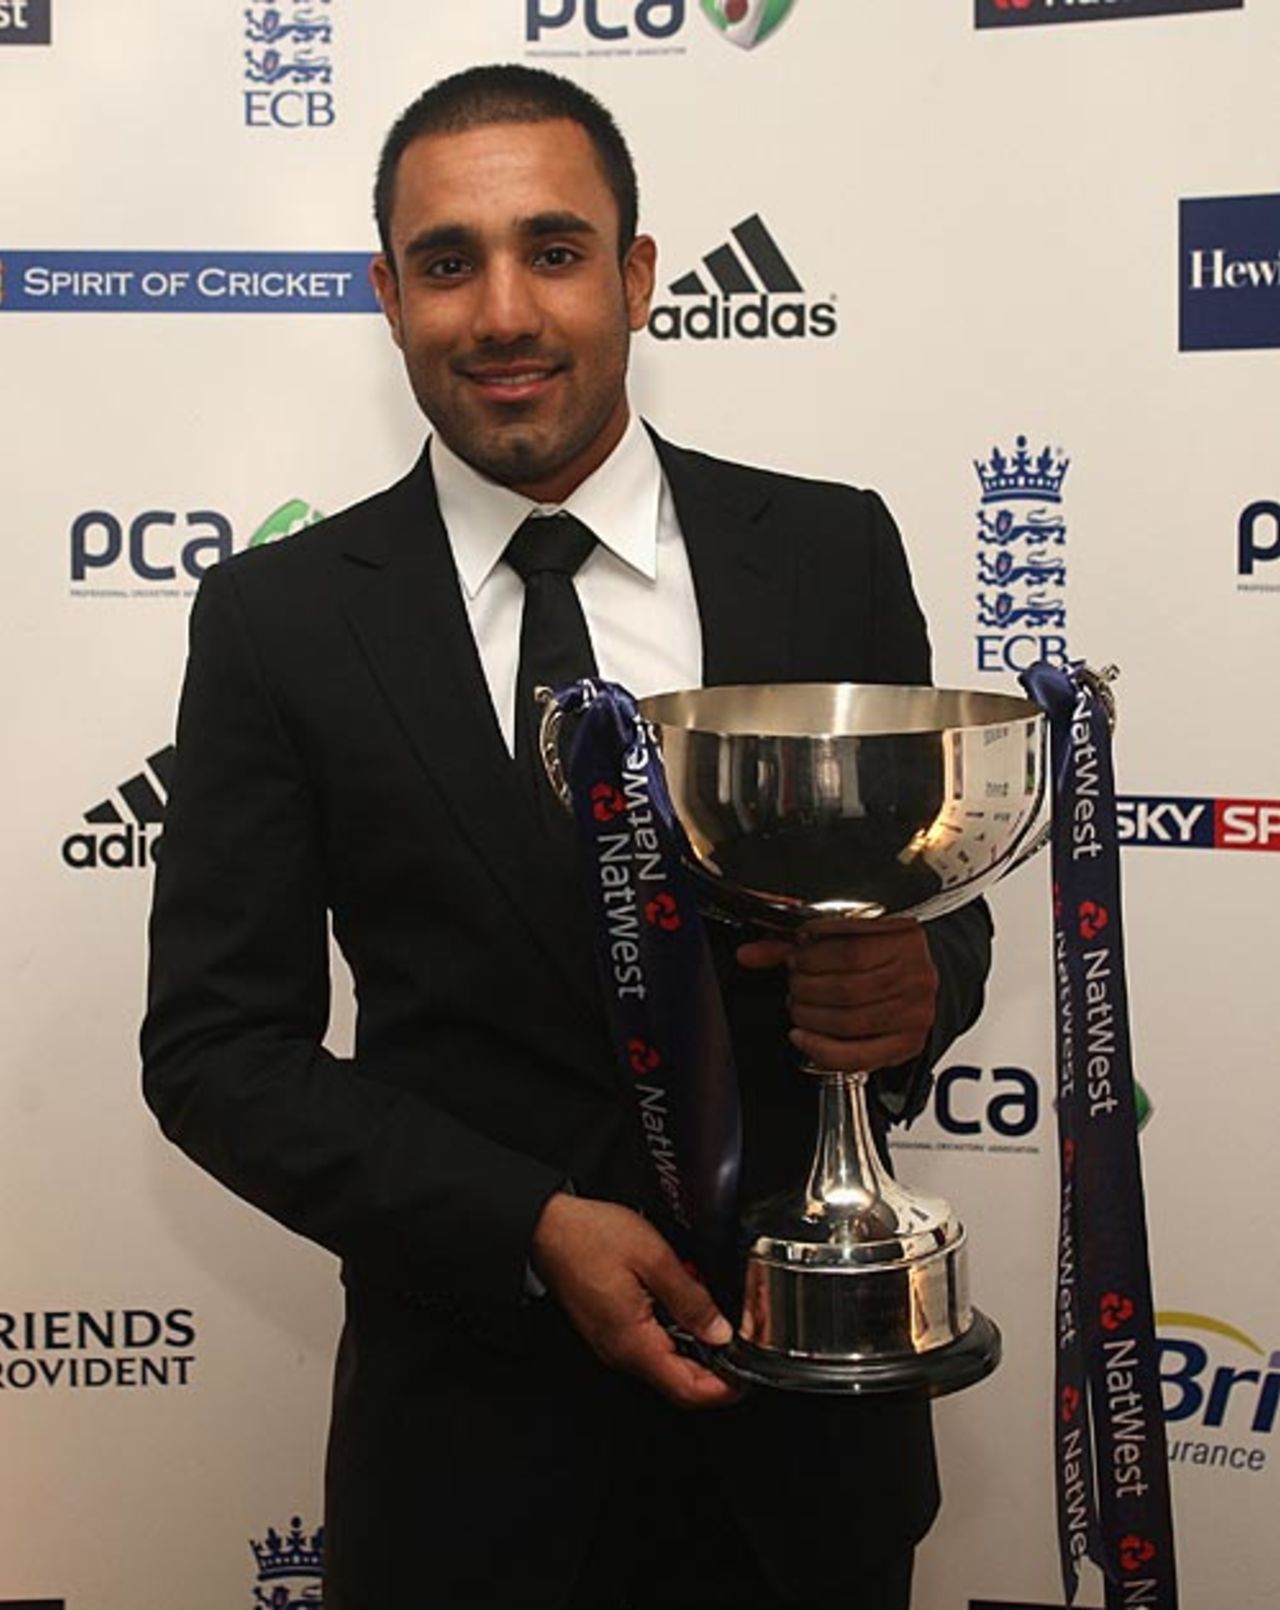 Ravi Bopara was the Young Player of the Year, Professional Cricketers' Association awards, London, September 29, 2008